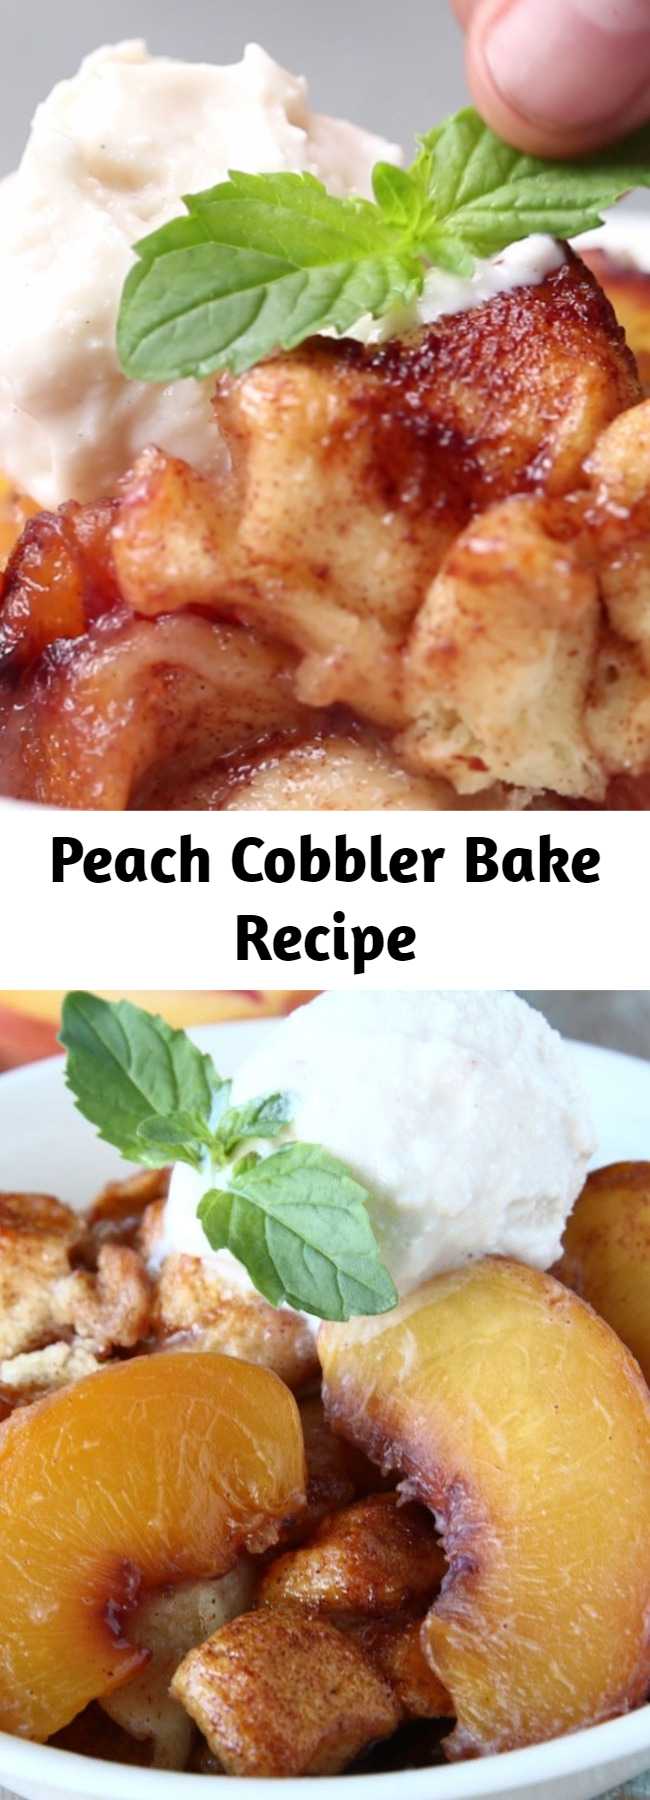 Peach Cobbler Bake Recipe - This Peach Cobbler Cake Is Where Your Taste Buds Need To Be